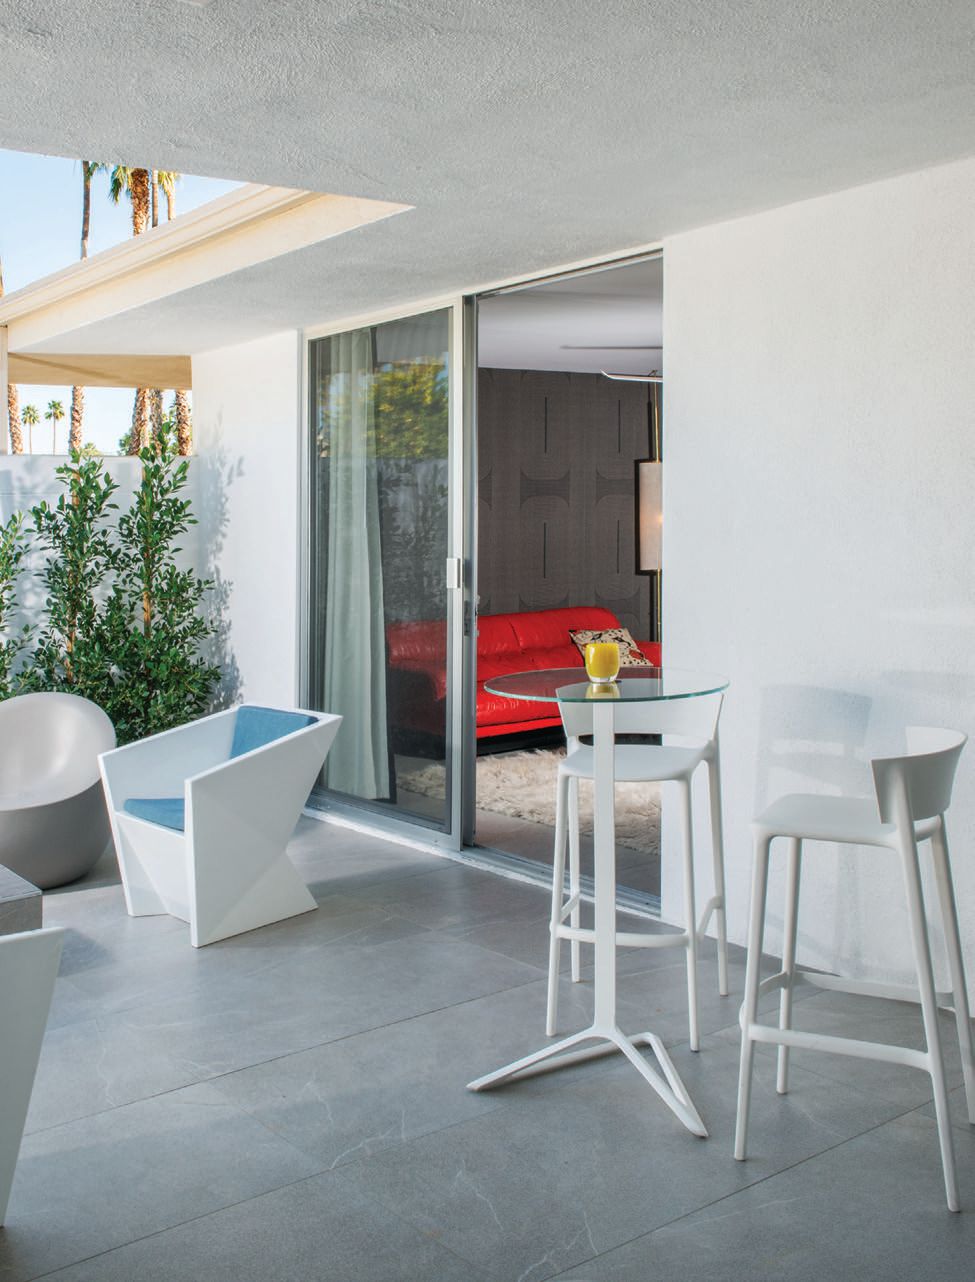 Vondom furniture and a custom fireplace fill the patio space. PHOTOGRAPHED BY DAN CHAVKIN